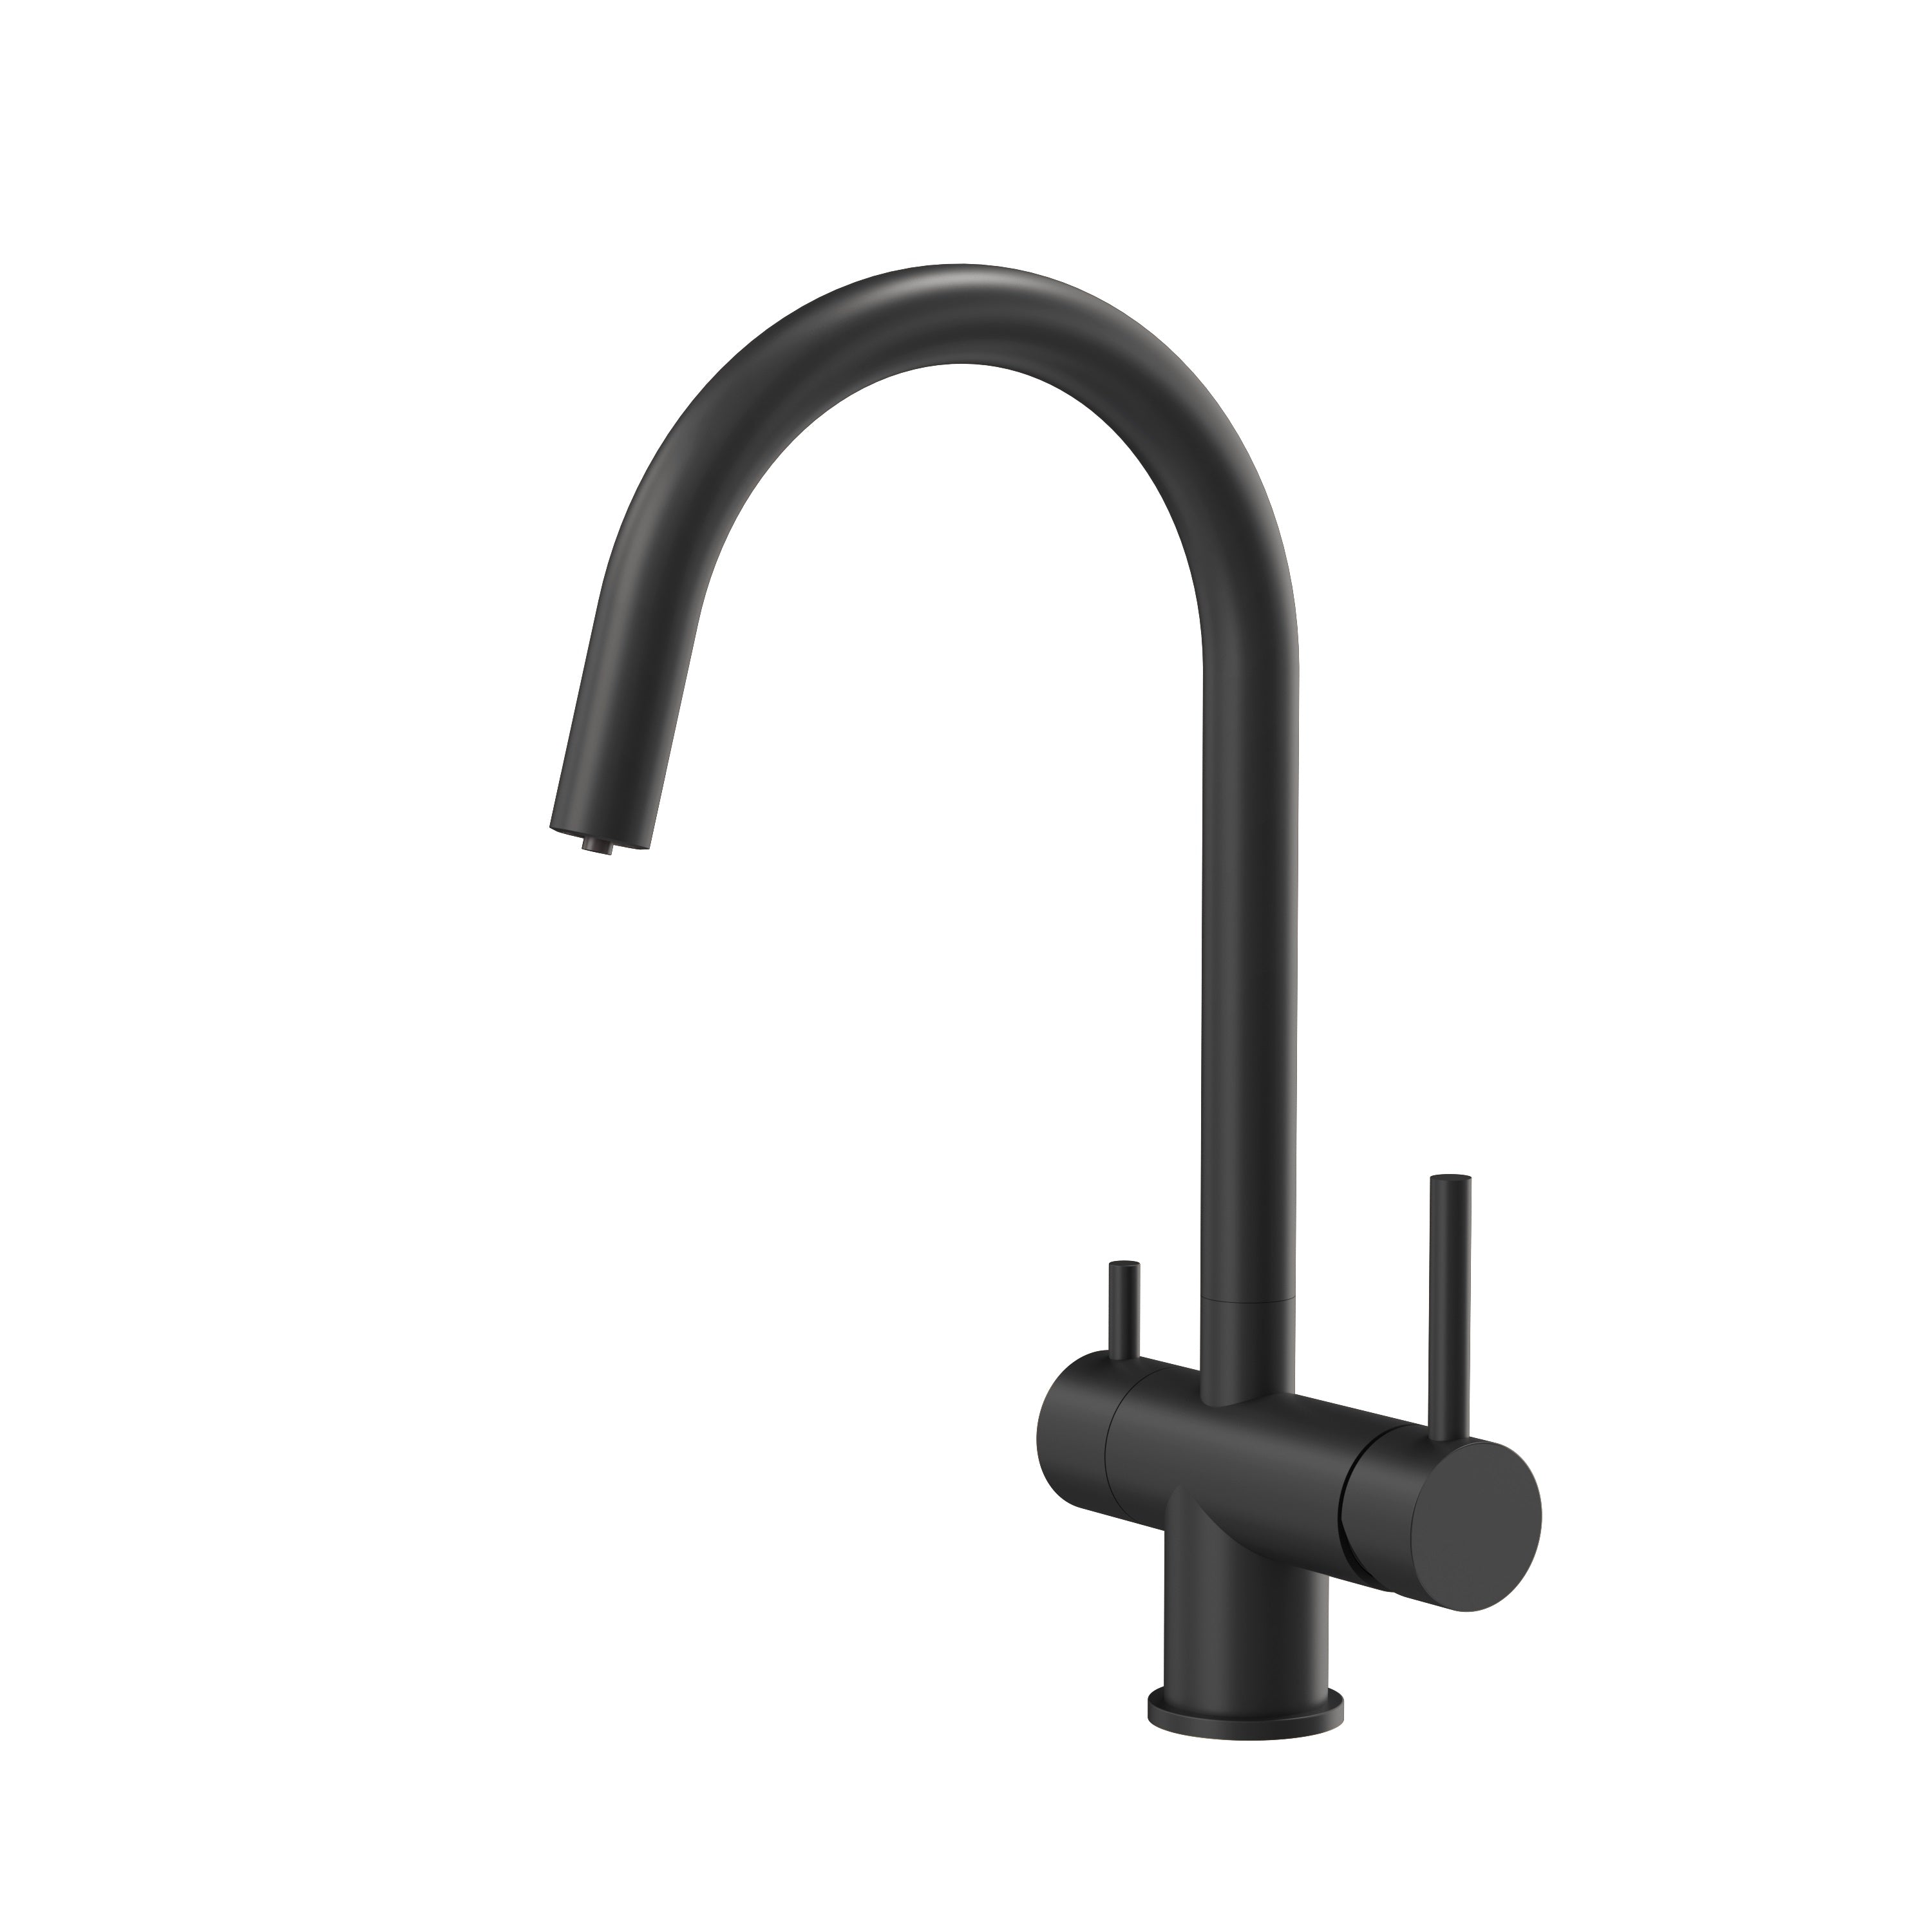 Quadron Caren 3-Way Filter Tap Pure Black, stainless steel